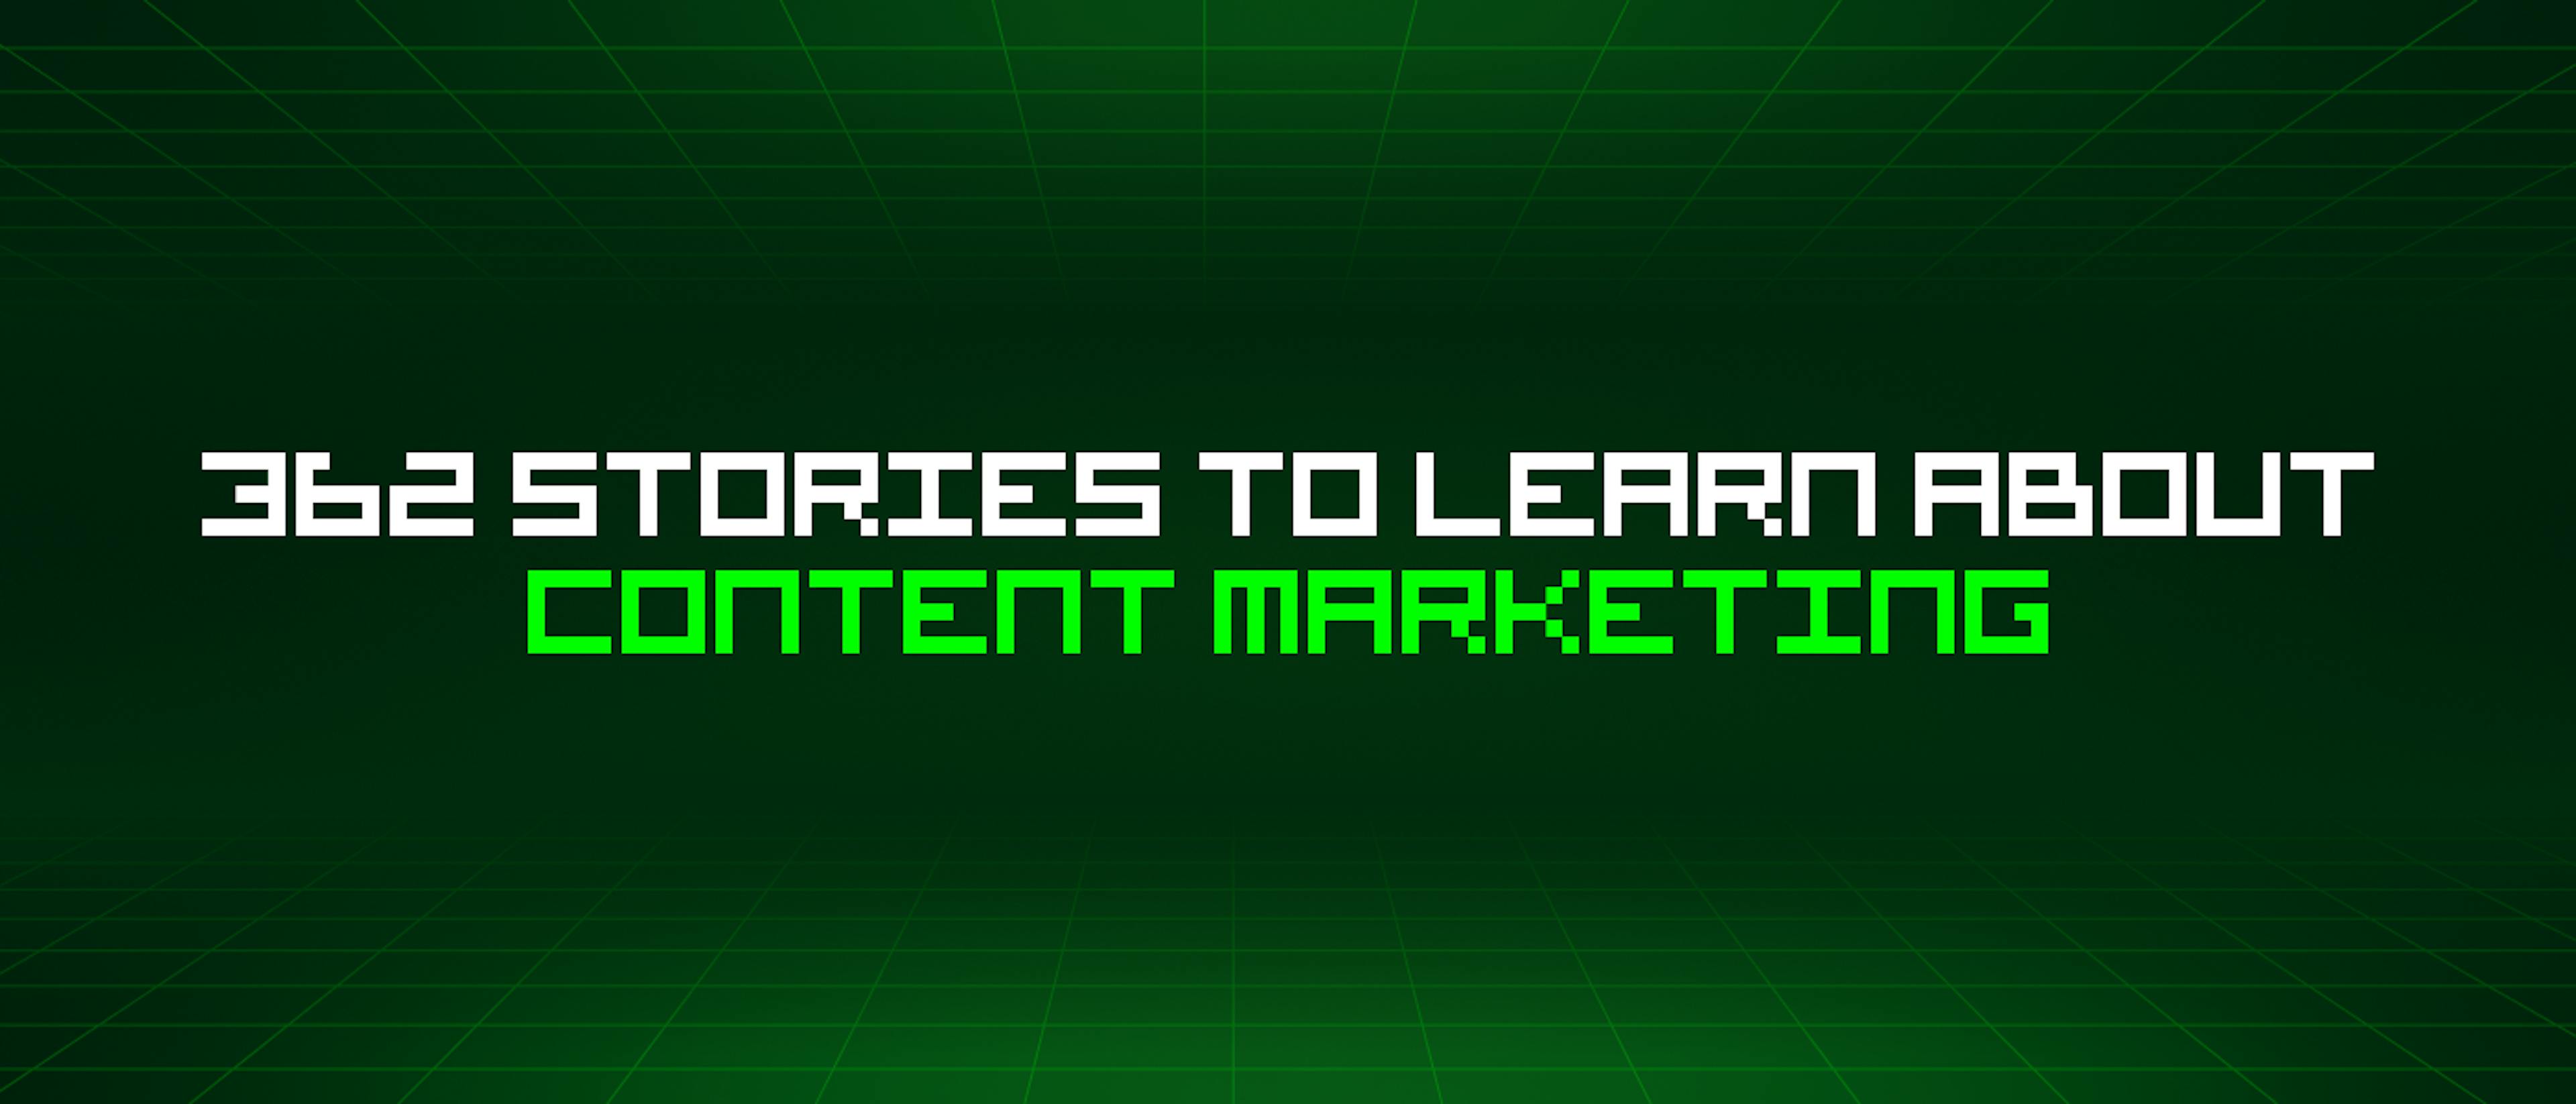 featured image - 362 Stories To Learn About Content Marketing